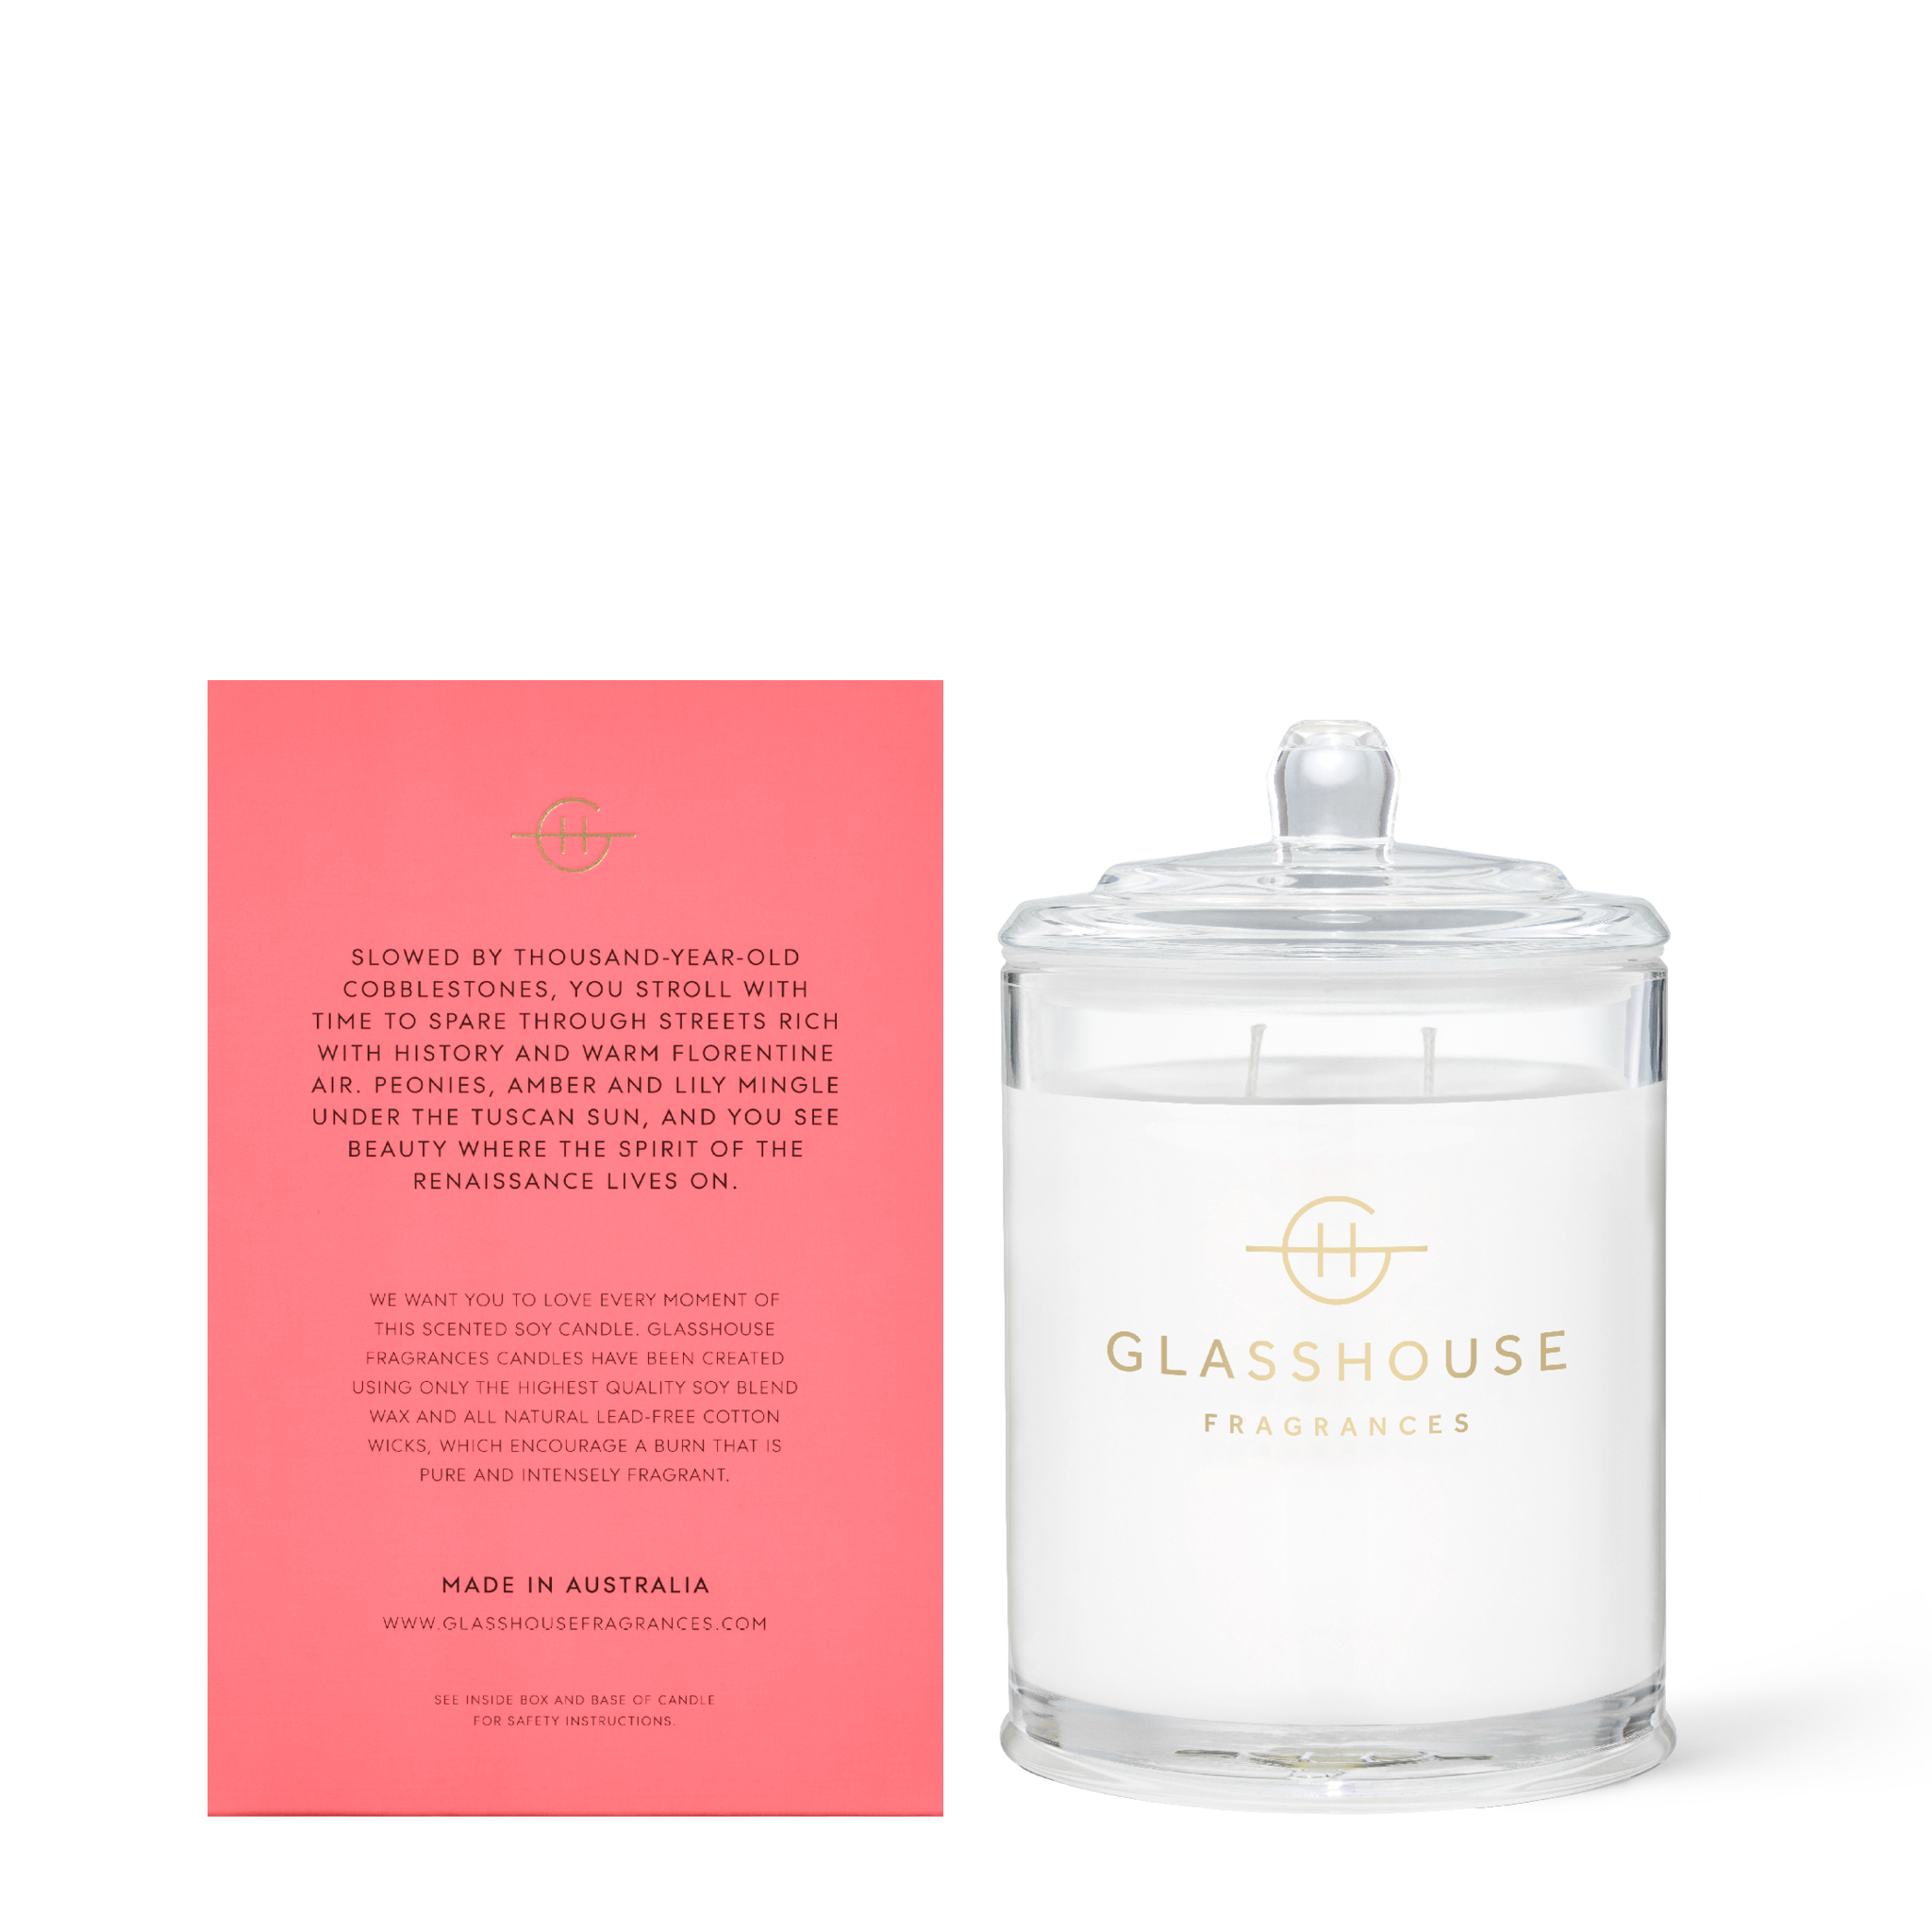 Glasshouse Fragrances Forever Florence Wild Peonies and Lily 380g Soy Candle with box - back of product shot